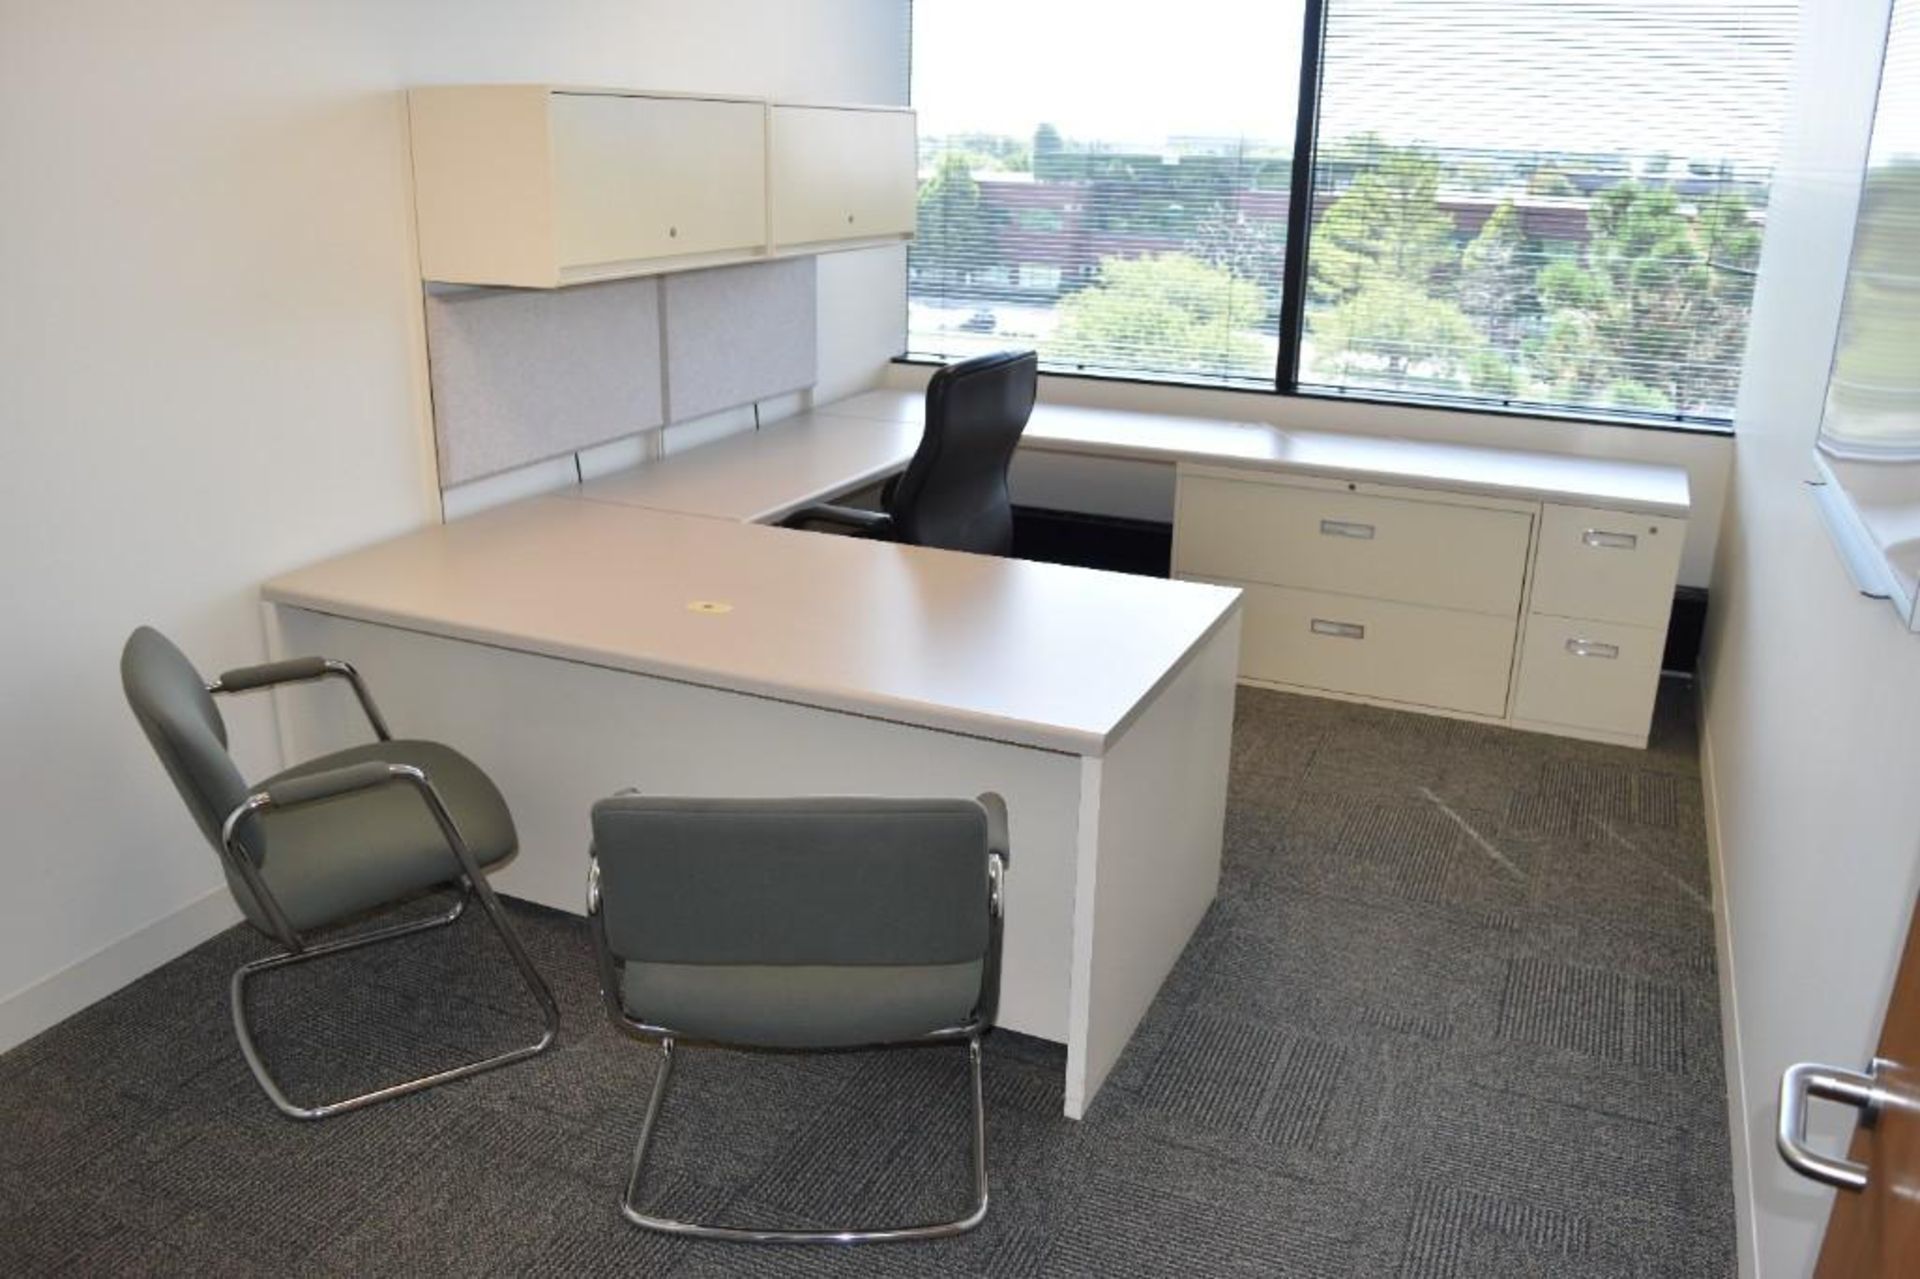 Lot c/o: (26) Assorted Office Suites - Relocated for ease of removal - Image 30 of 106